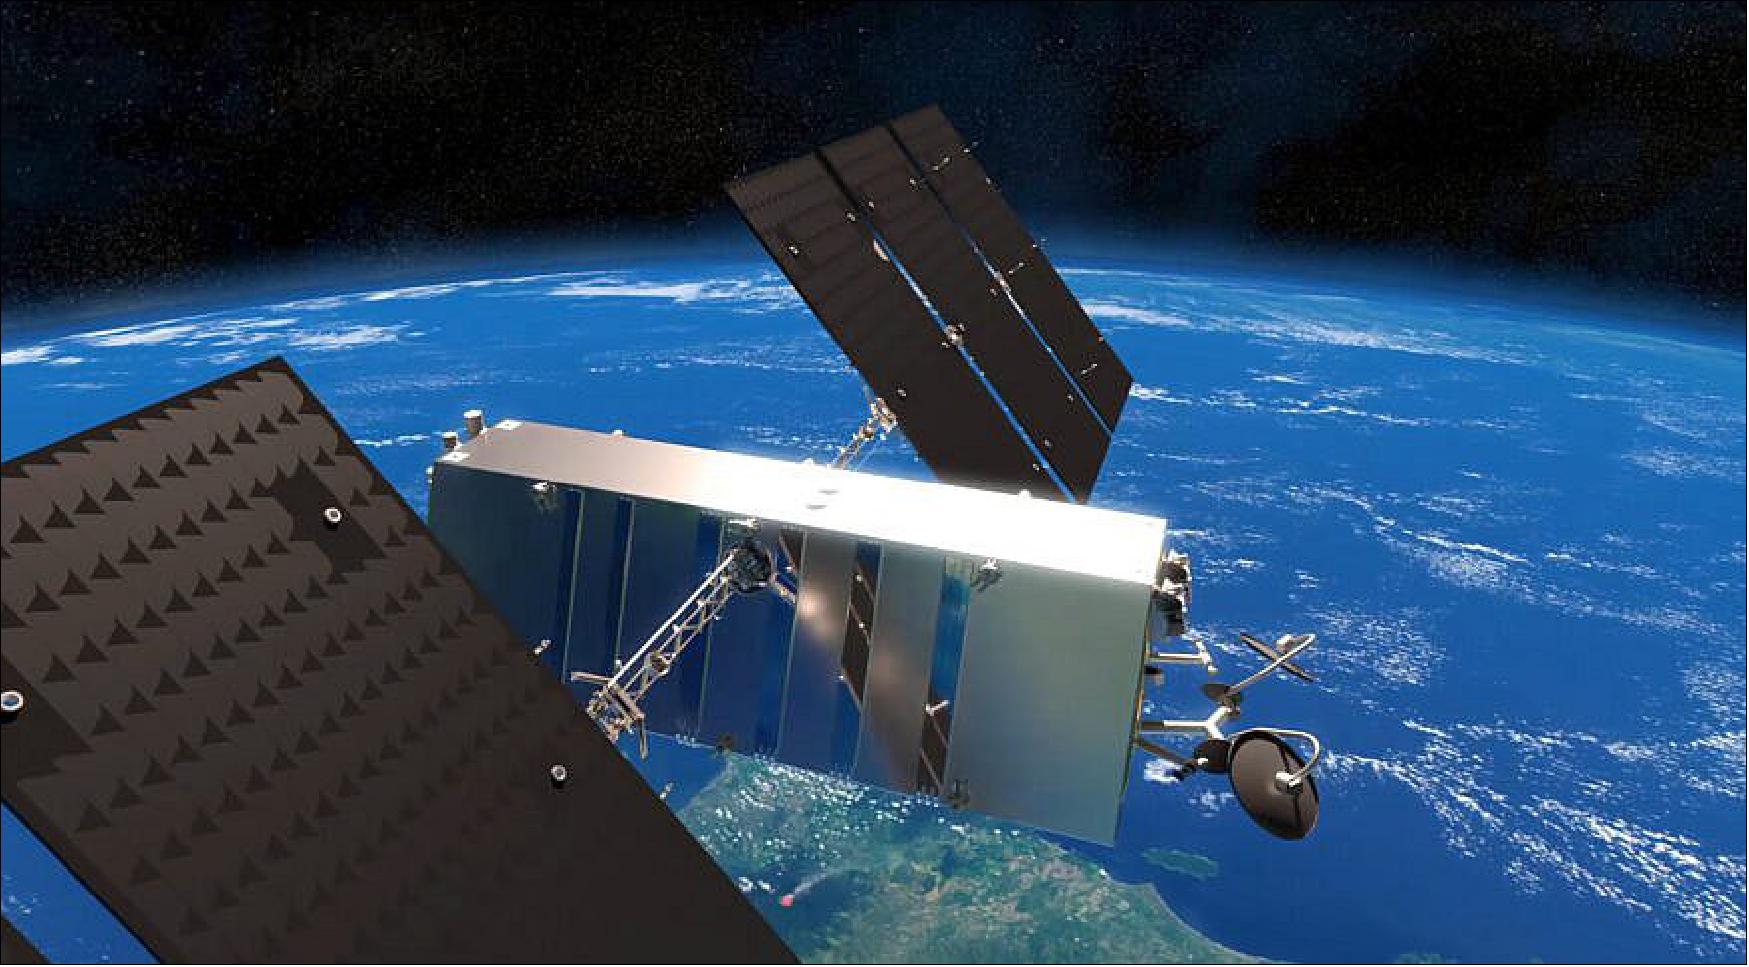 Figure 6: Telesat selected Thales Alenia Space to be the prime manufacturer of Telesat’s global LEO constellation Lightspeed. The network is projected to have 298 satellites (image credit: Telesat)